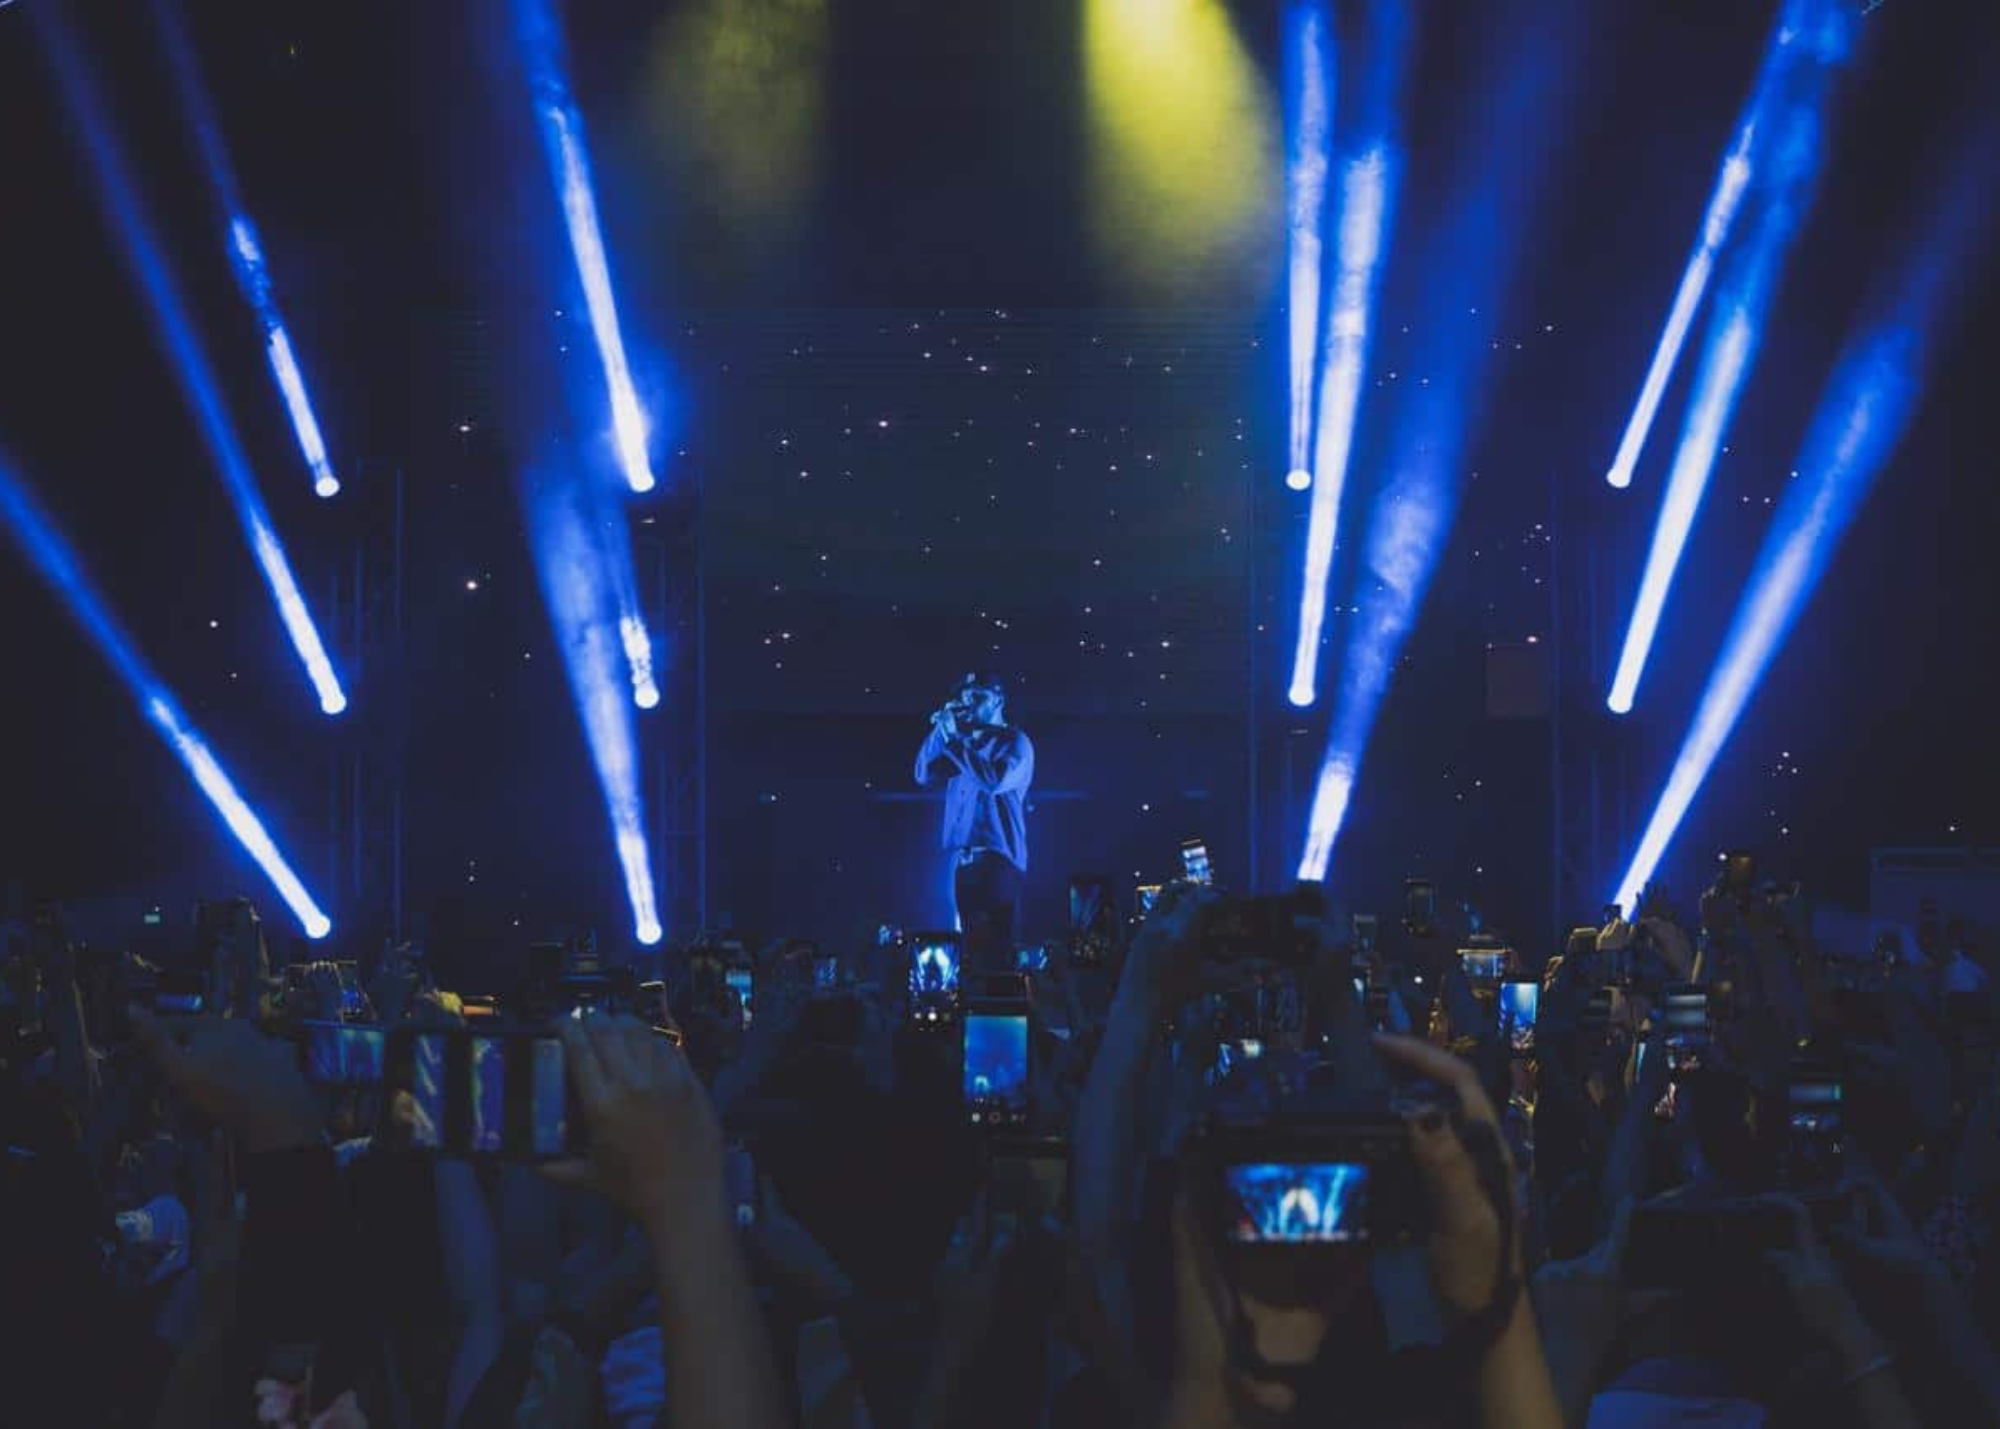 A distant picture showing Bazzi performing in front of the people